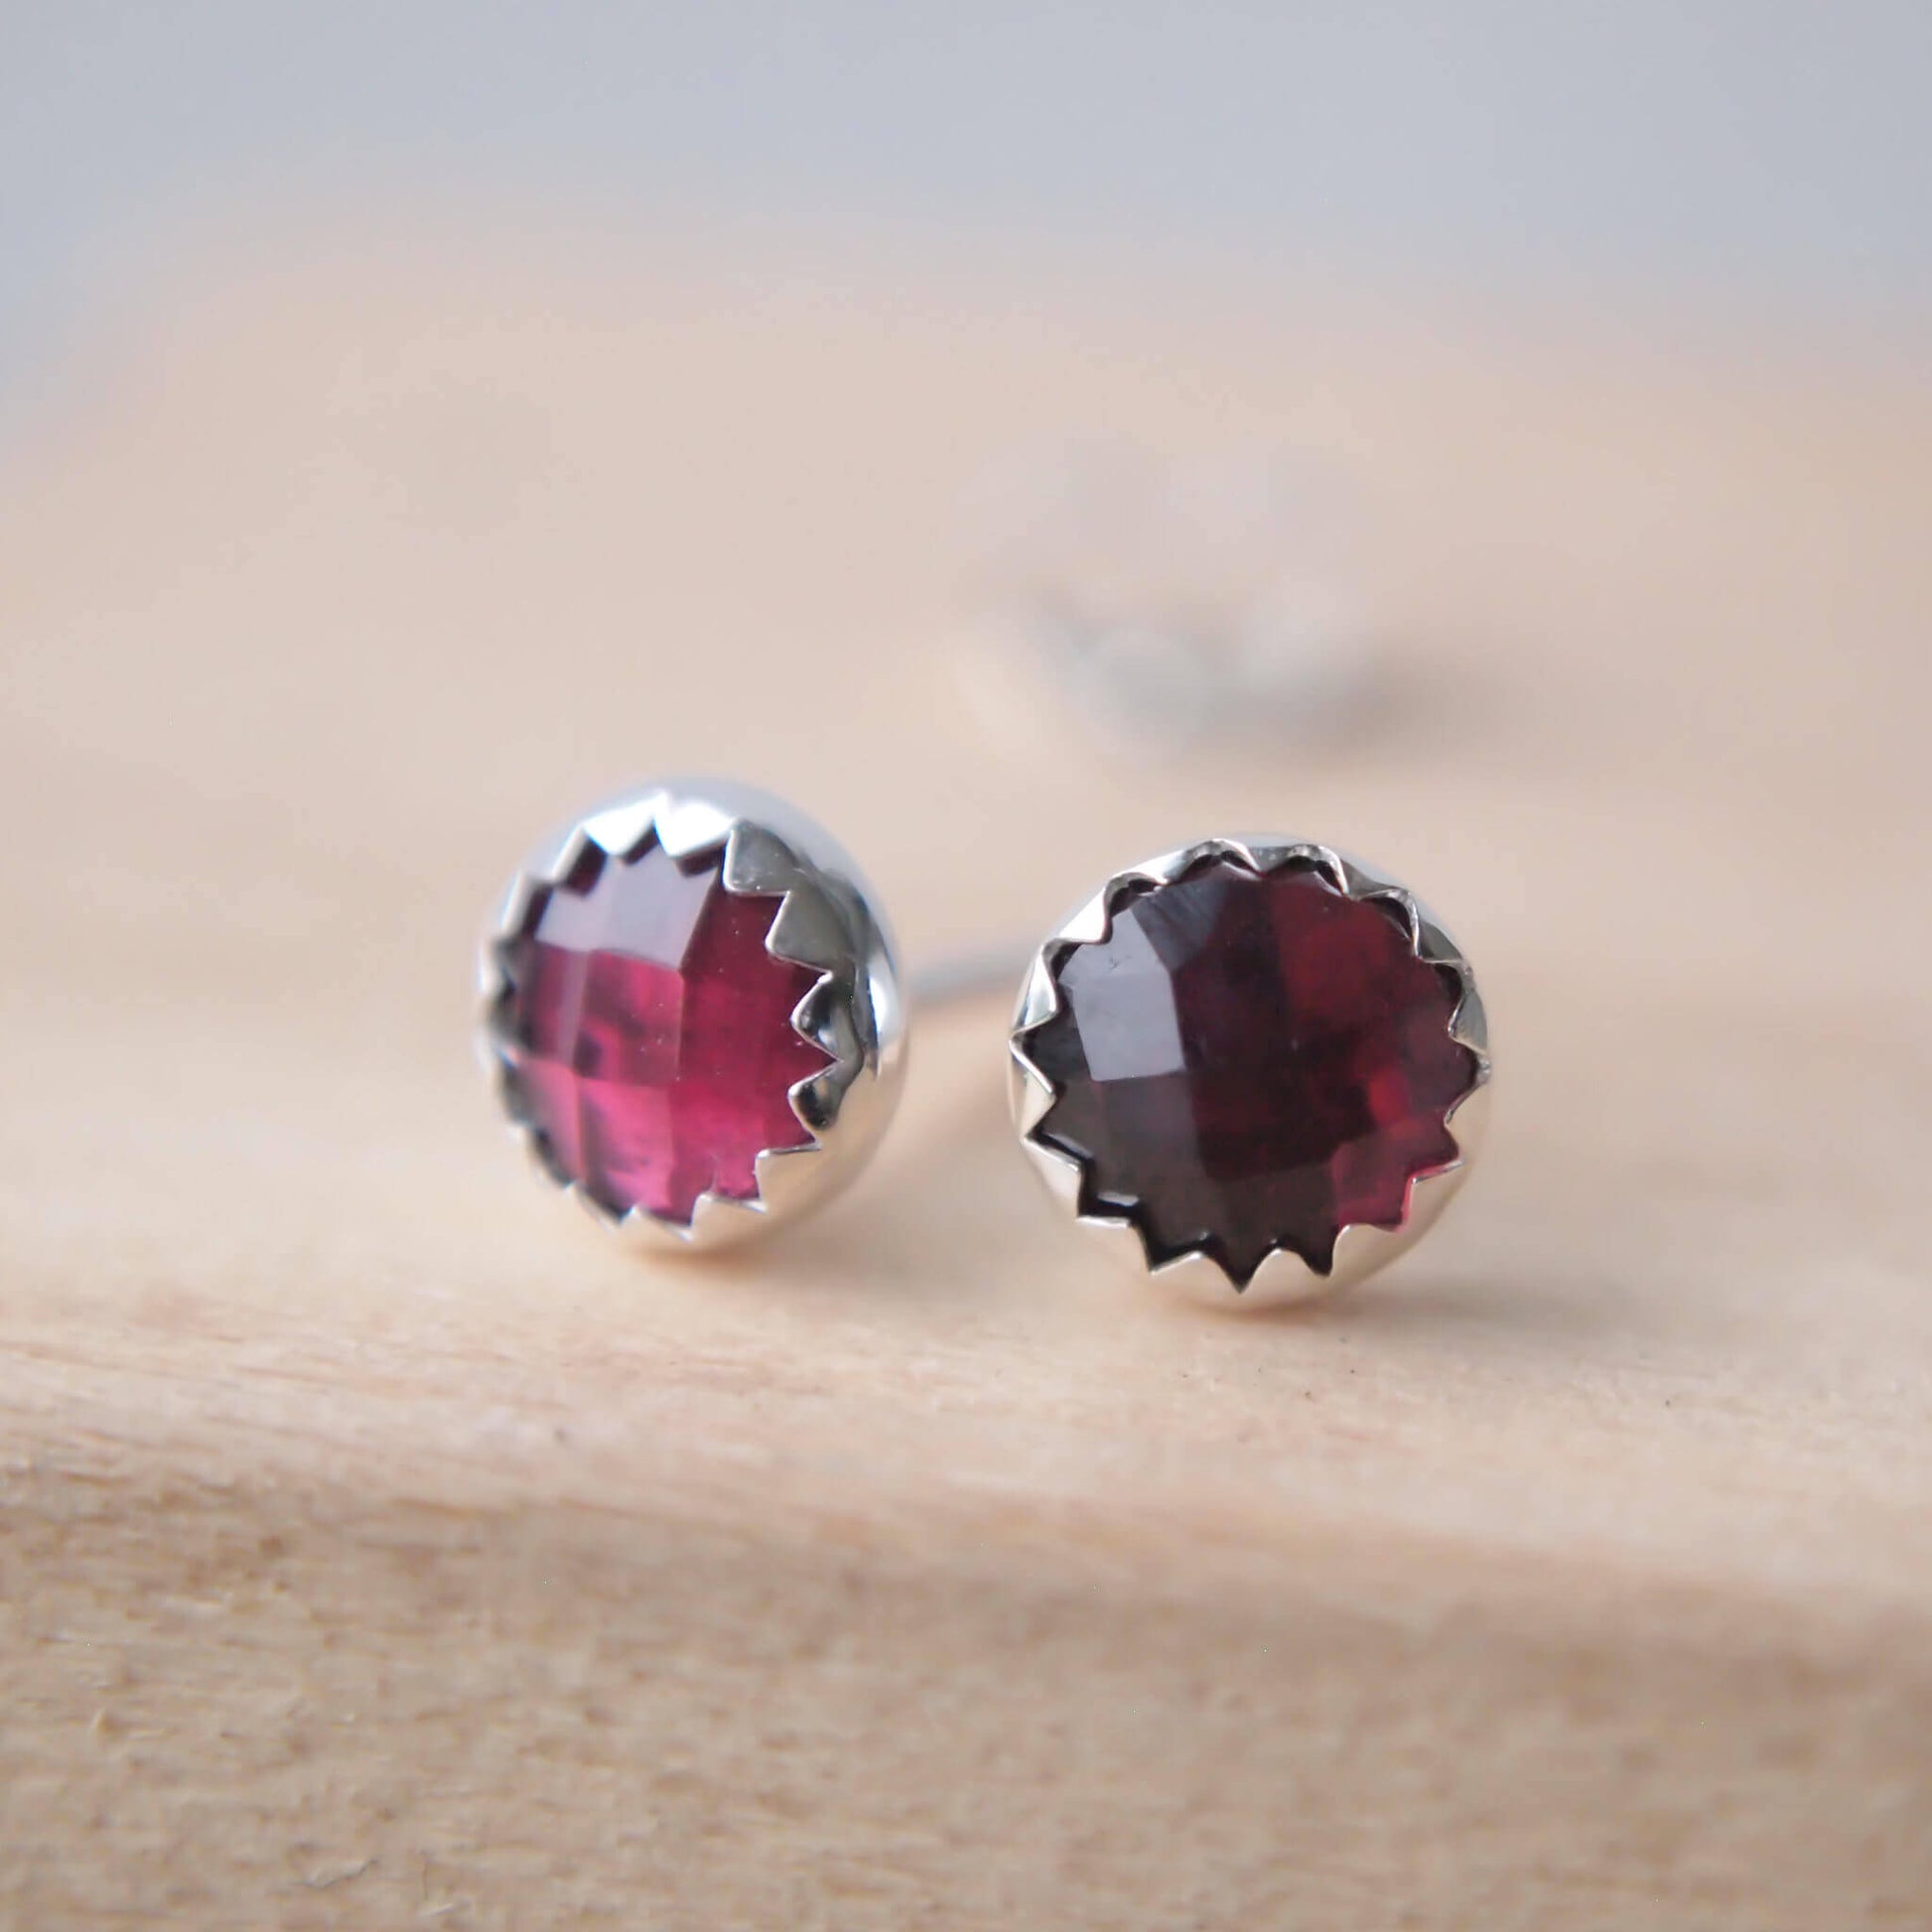 Simple minimalist sterling silver gemstone earrings with a round sparkly garnet gemstone, birthstone for January. Thea earrings are round, measuring 5mm with the gemstone being the main feature. Handmade in Scotland by Maram Jewellery